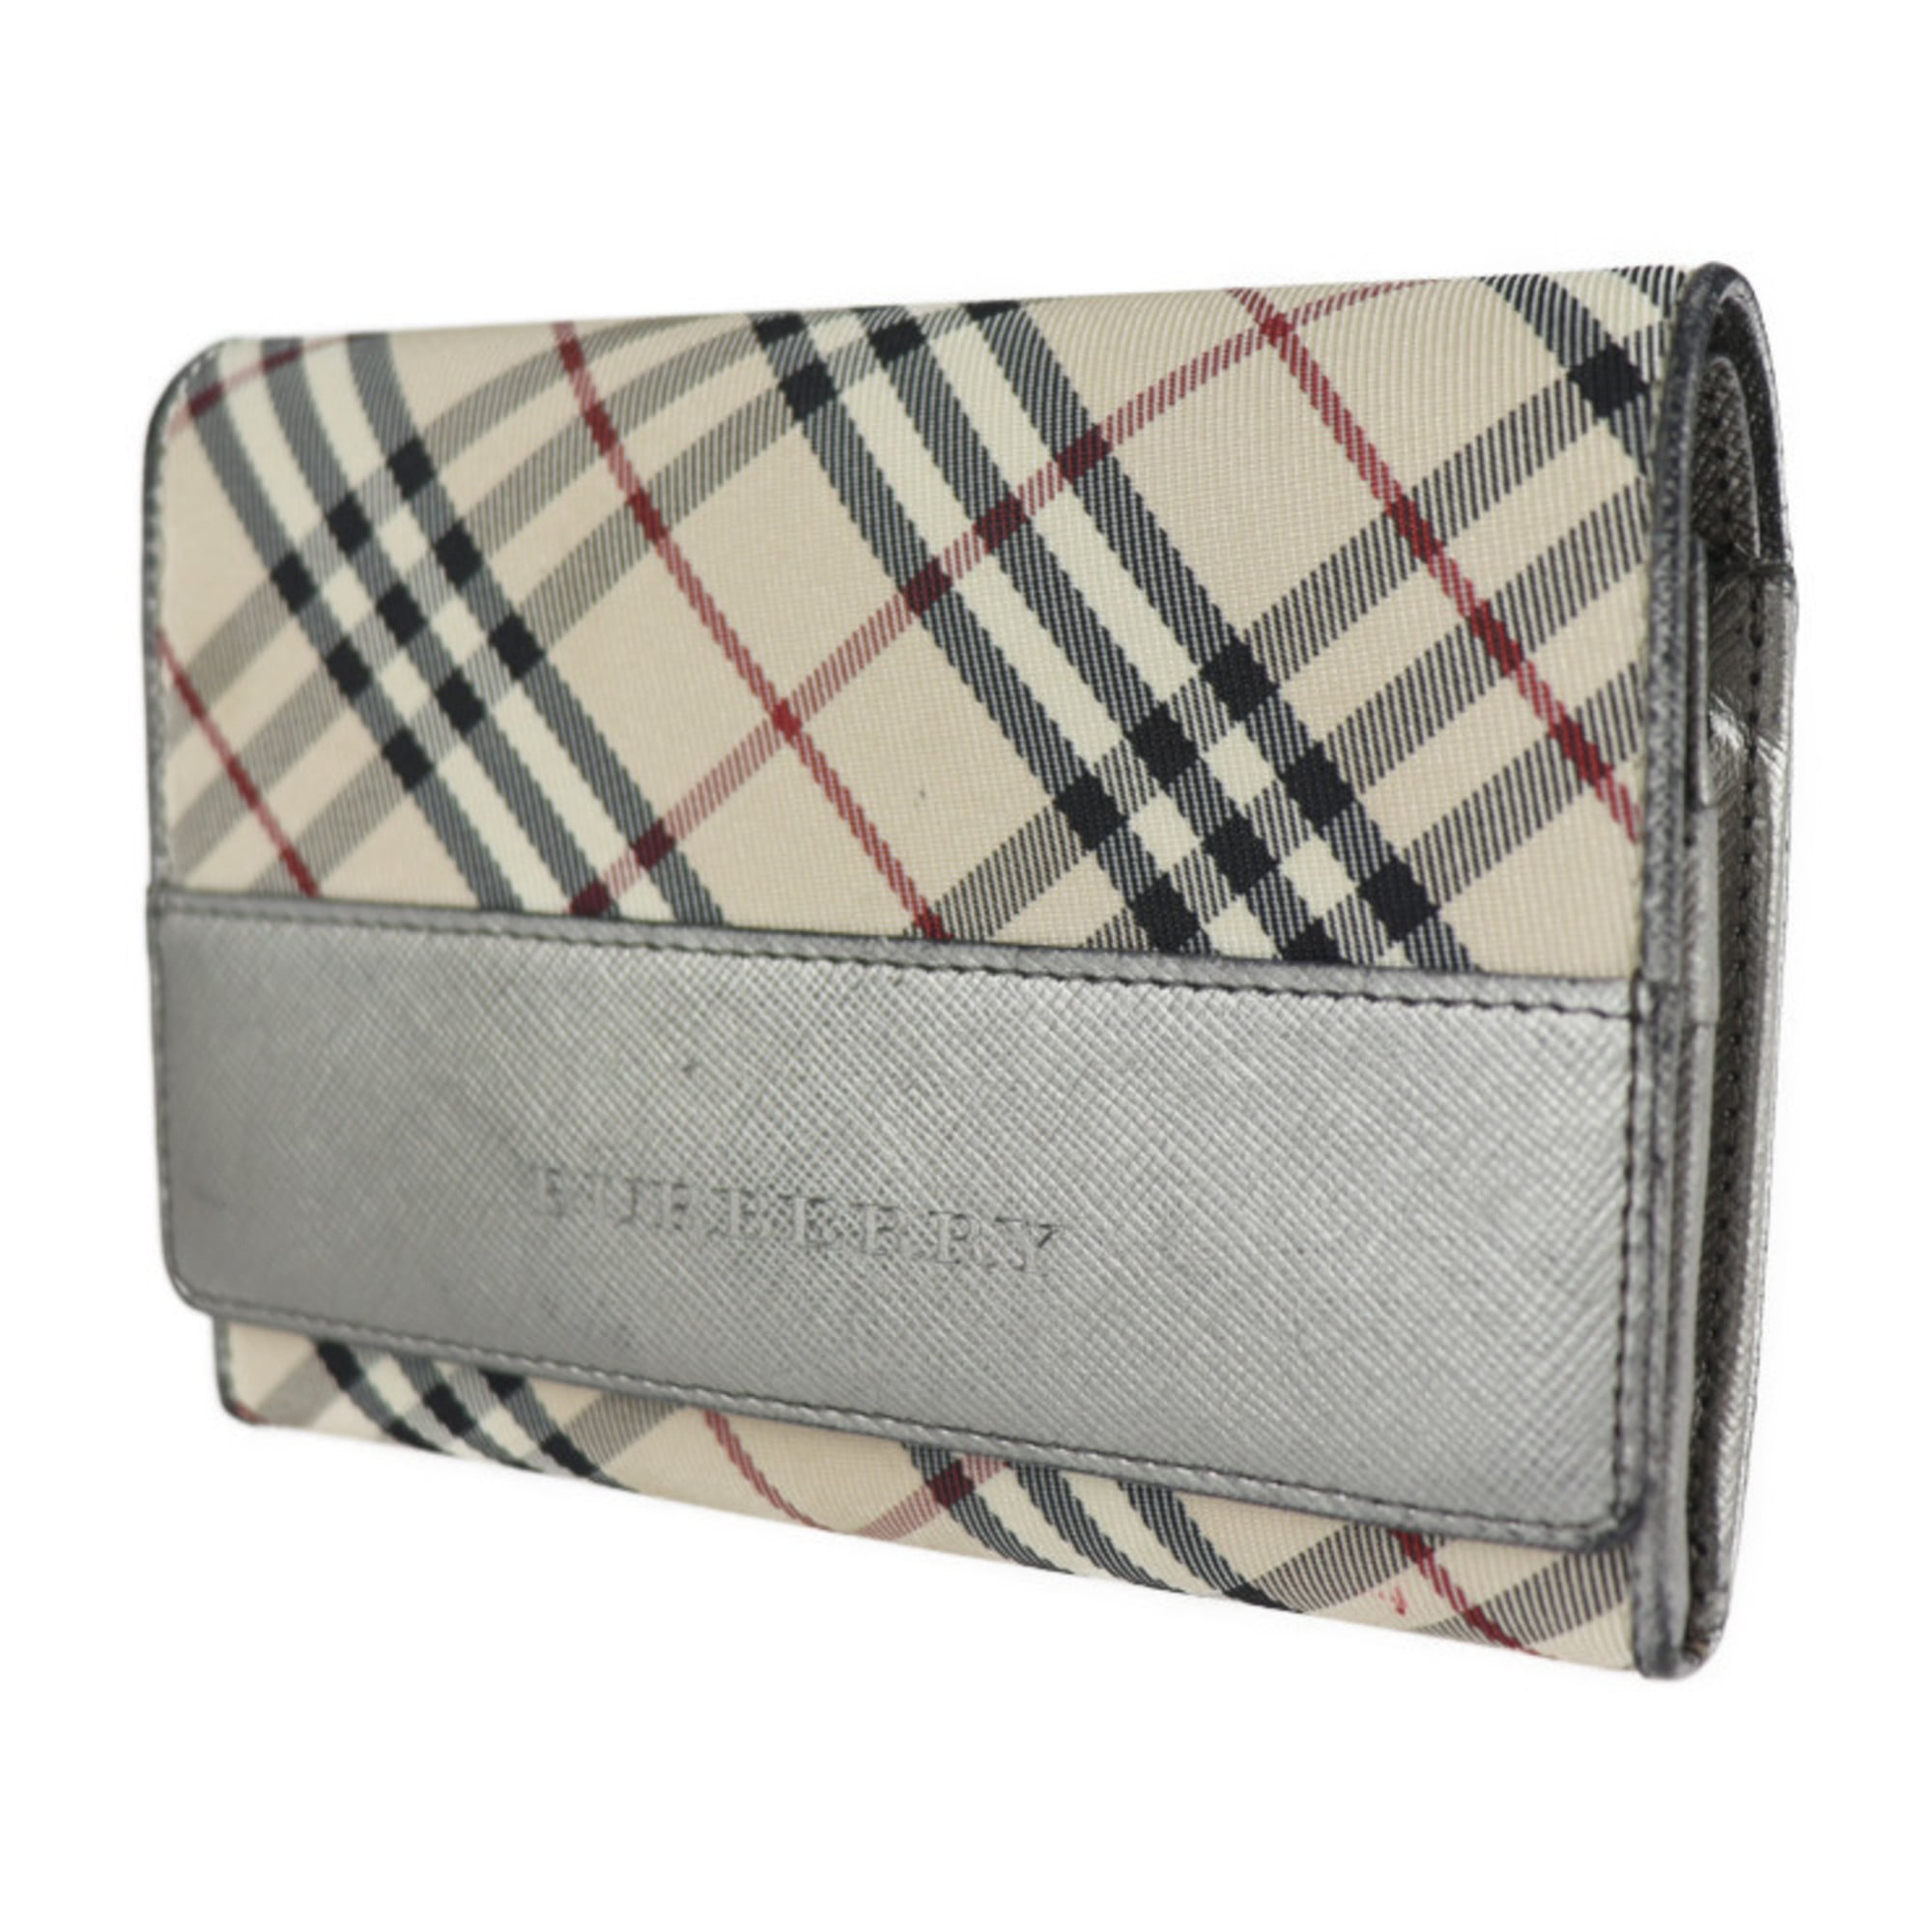 Authenticated Used BURBERRY Burberry folio wallet canvas leather beige  silver checked pattern L-shaped fastener 